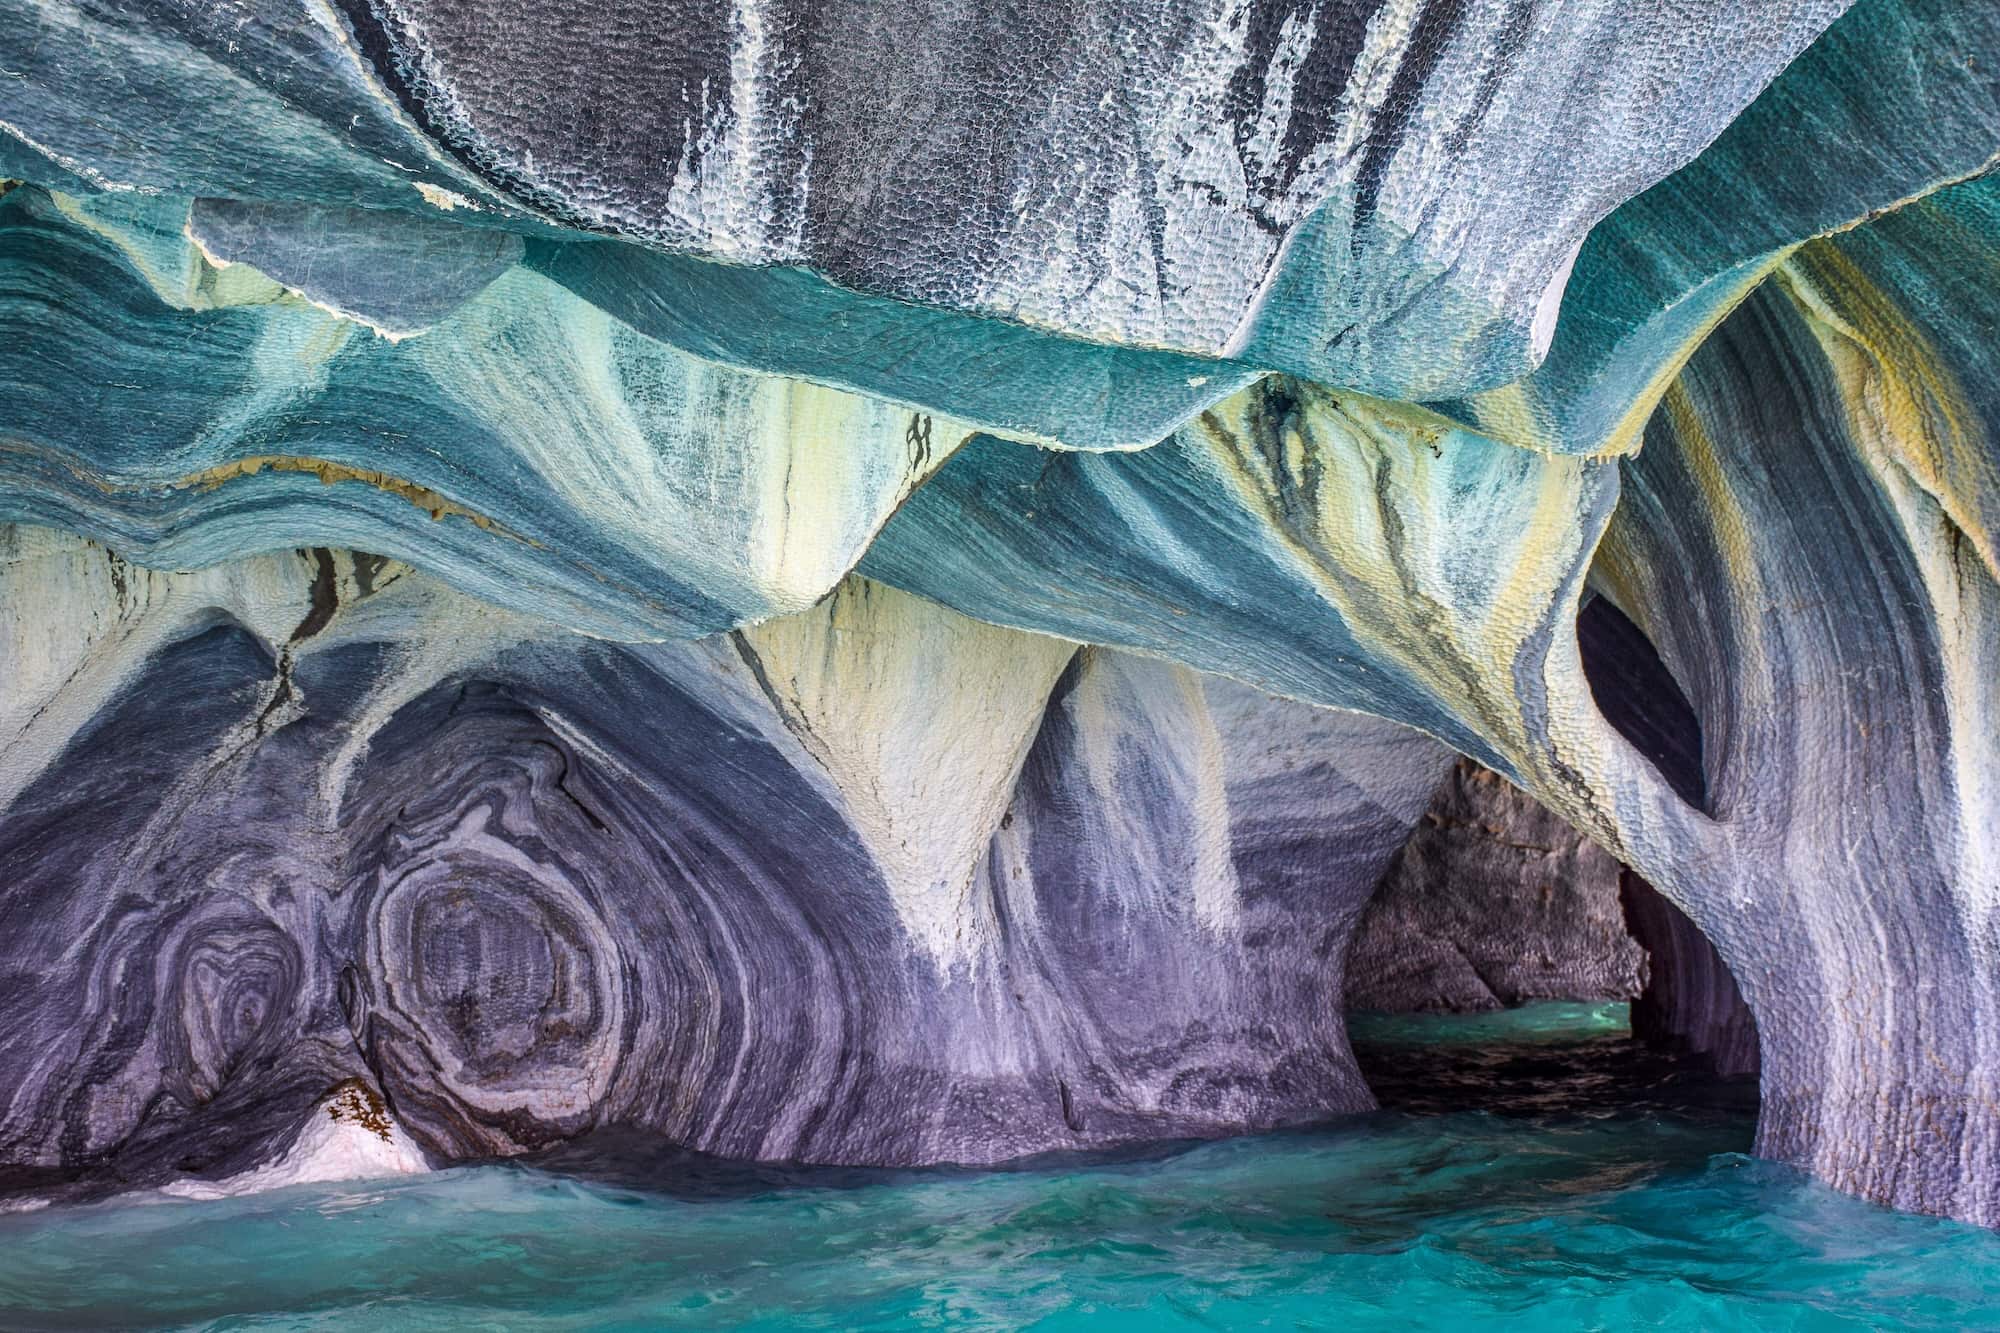 Marble Caves in Patagonia Chile